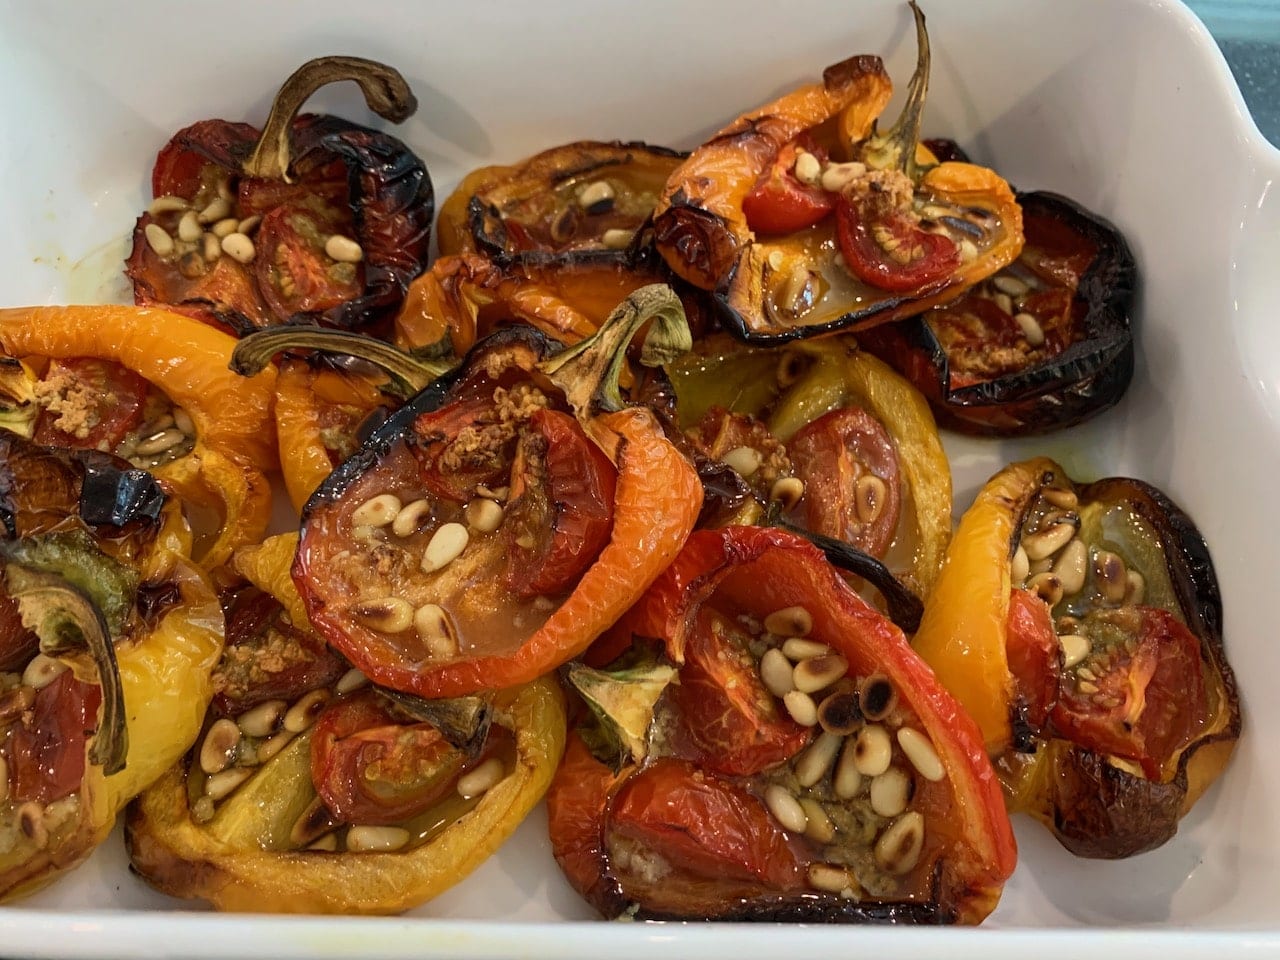 Roasted peppers with tomatoes and garlic - The Plant based dad